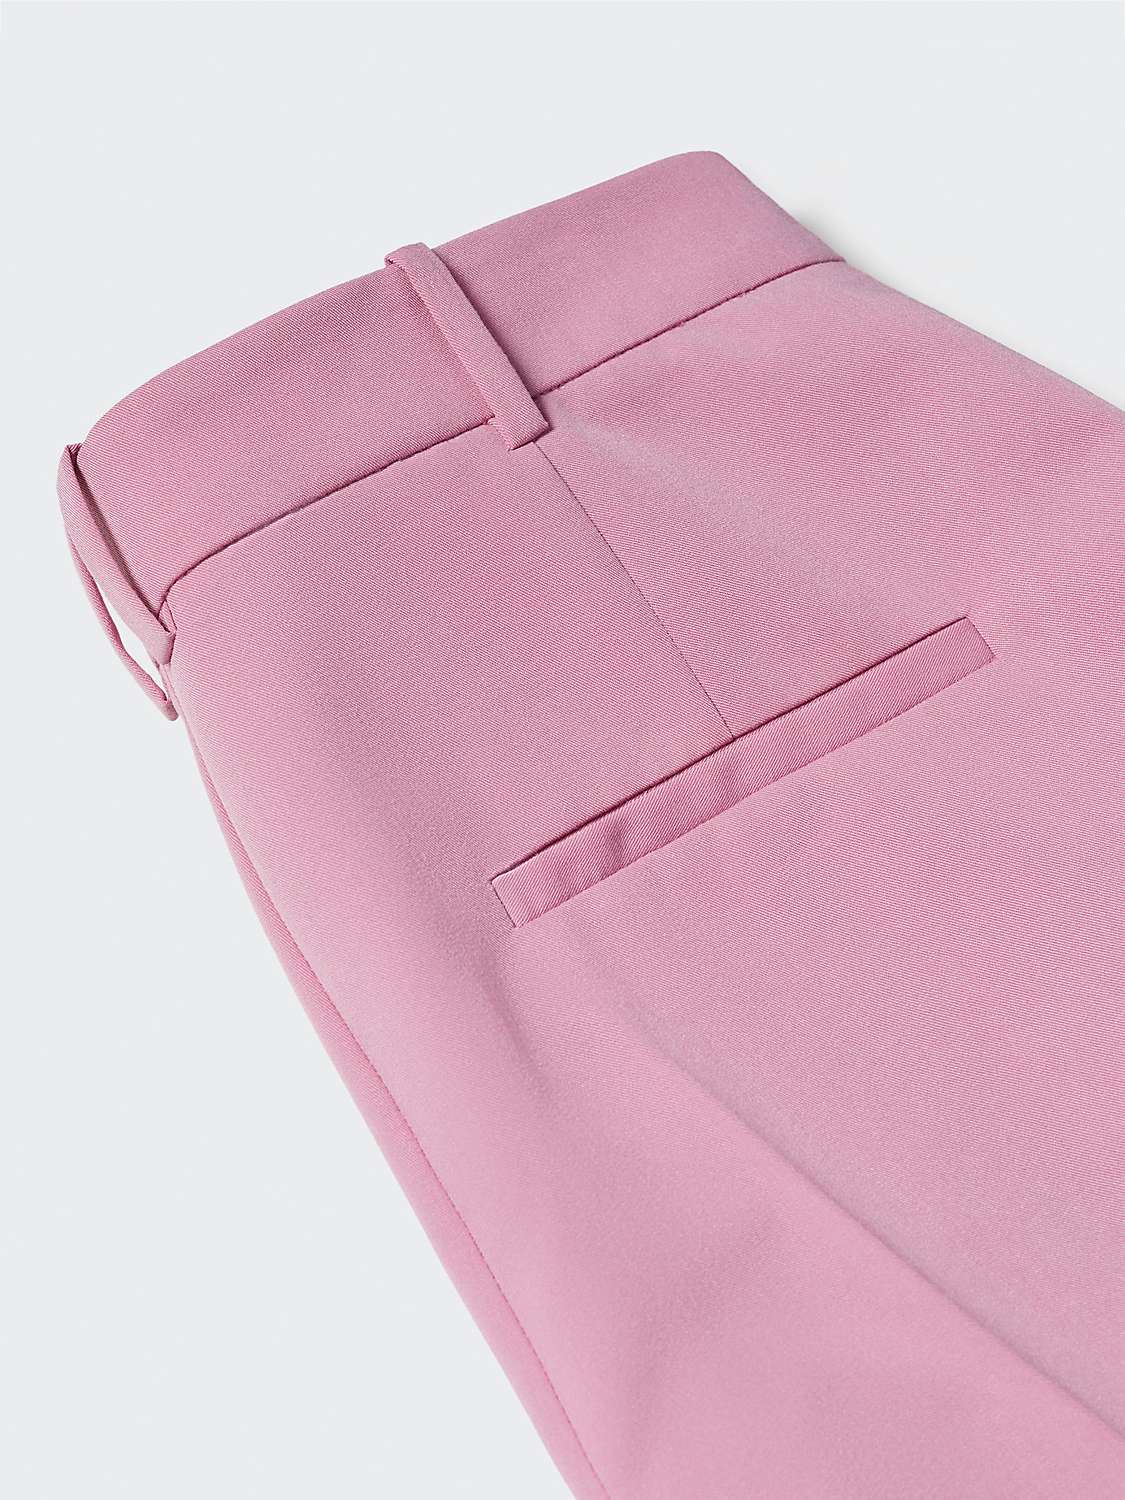 Mango Boreal Straight Suit Trousers, Pink at John Lewis & Partners